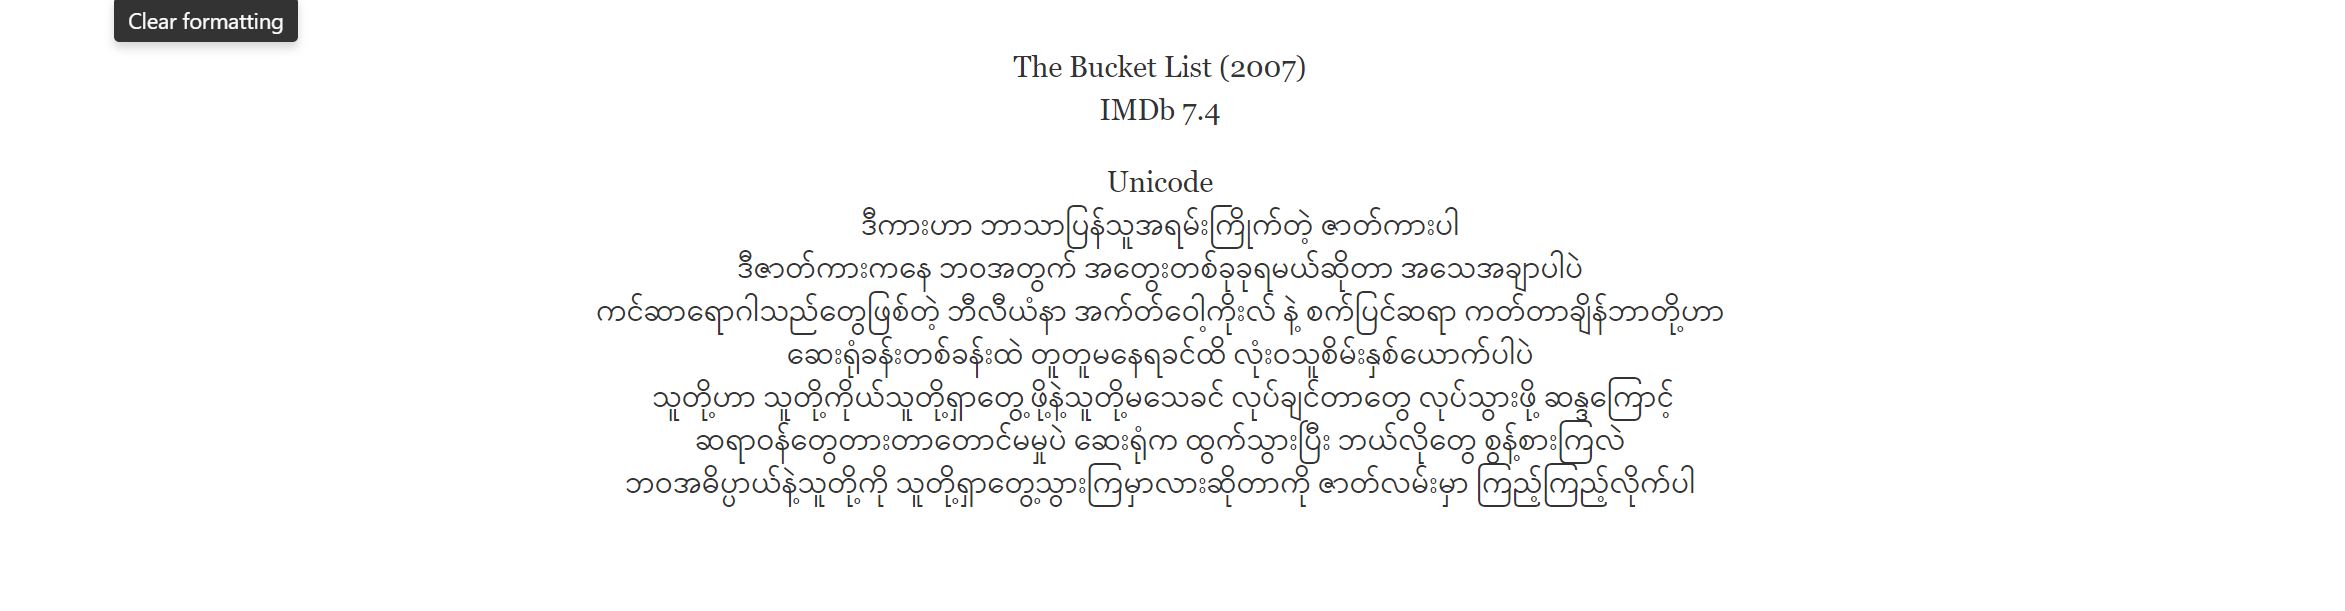 the bucket list synopsis